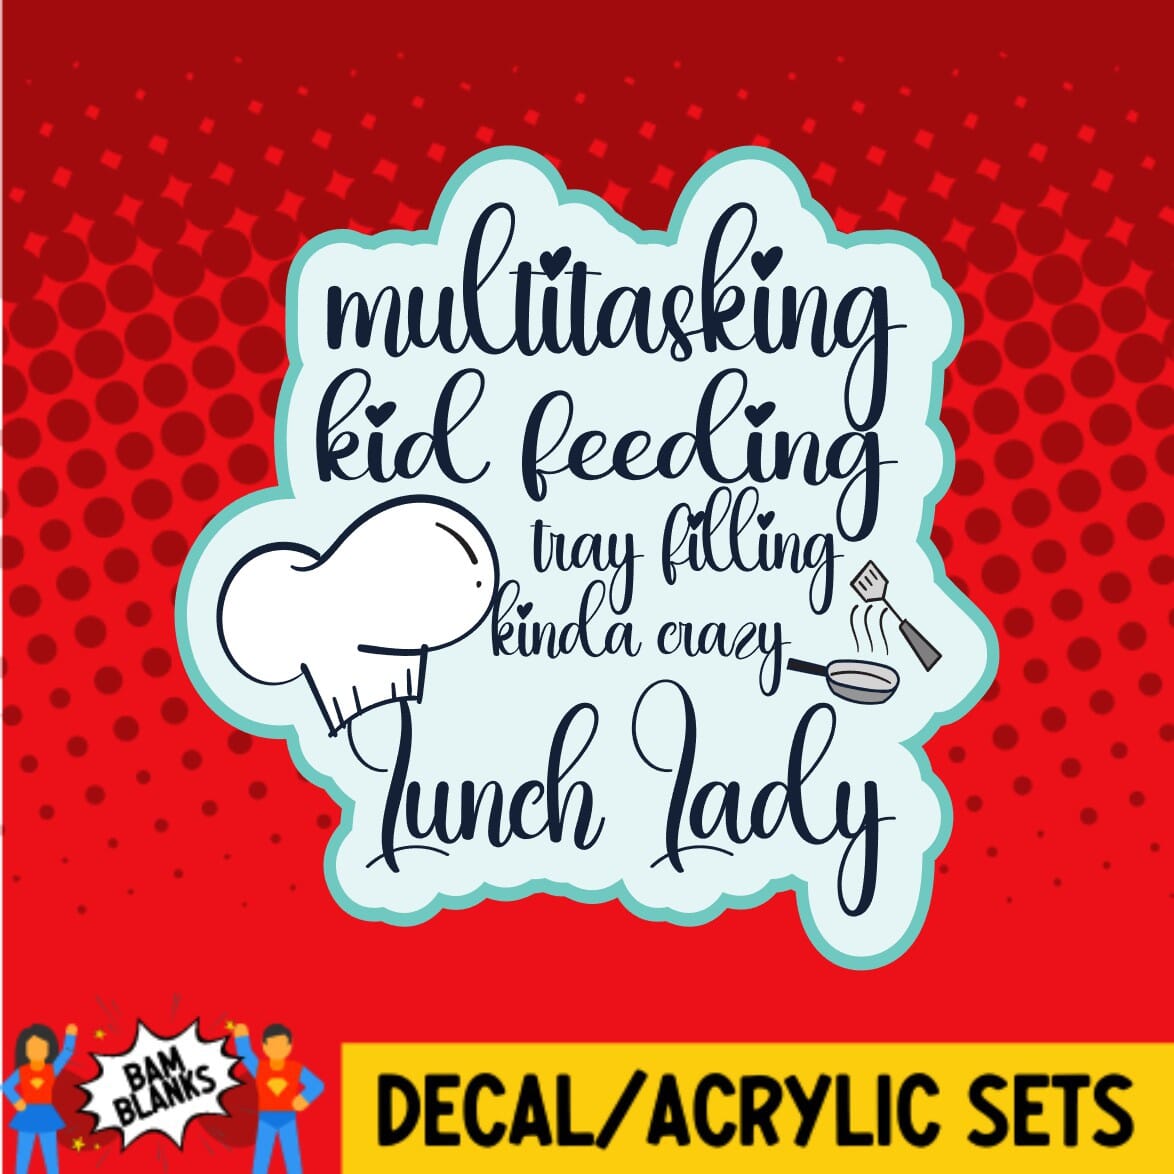 Multitasking Lunch Lady - DECAL AND ACRYLIC SHAPE #DA0369